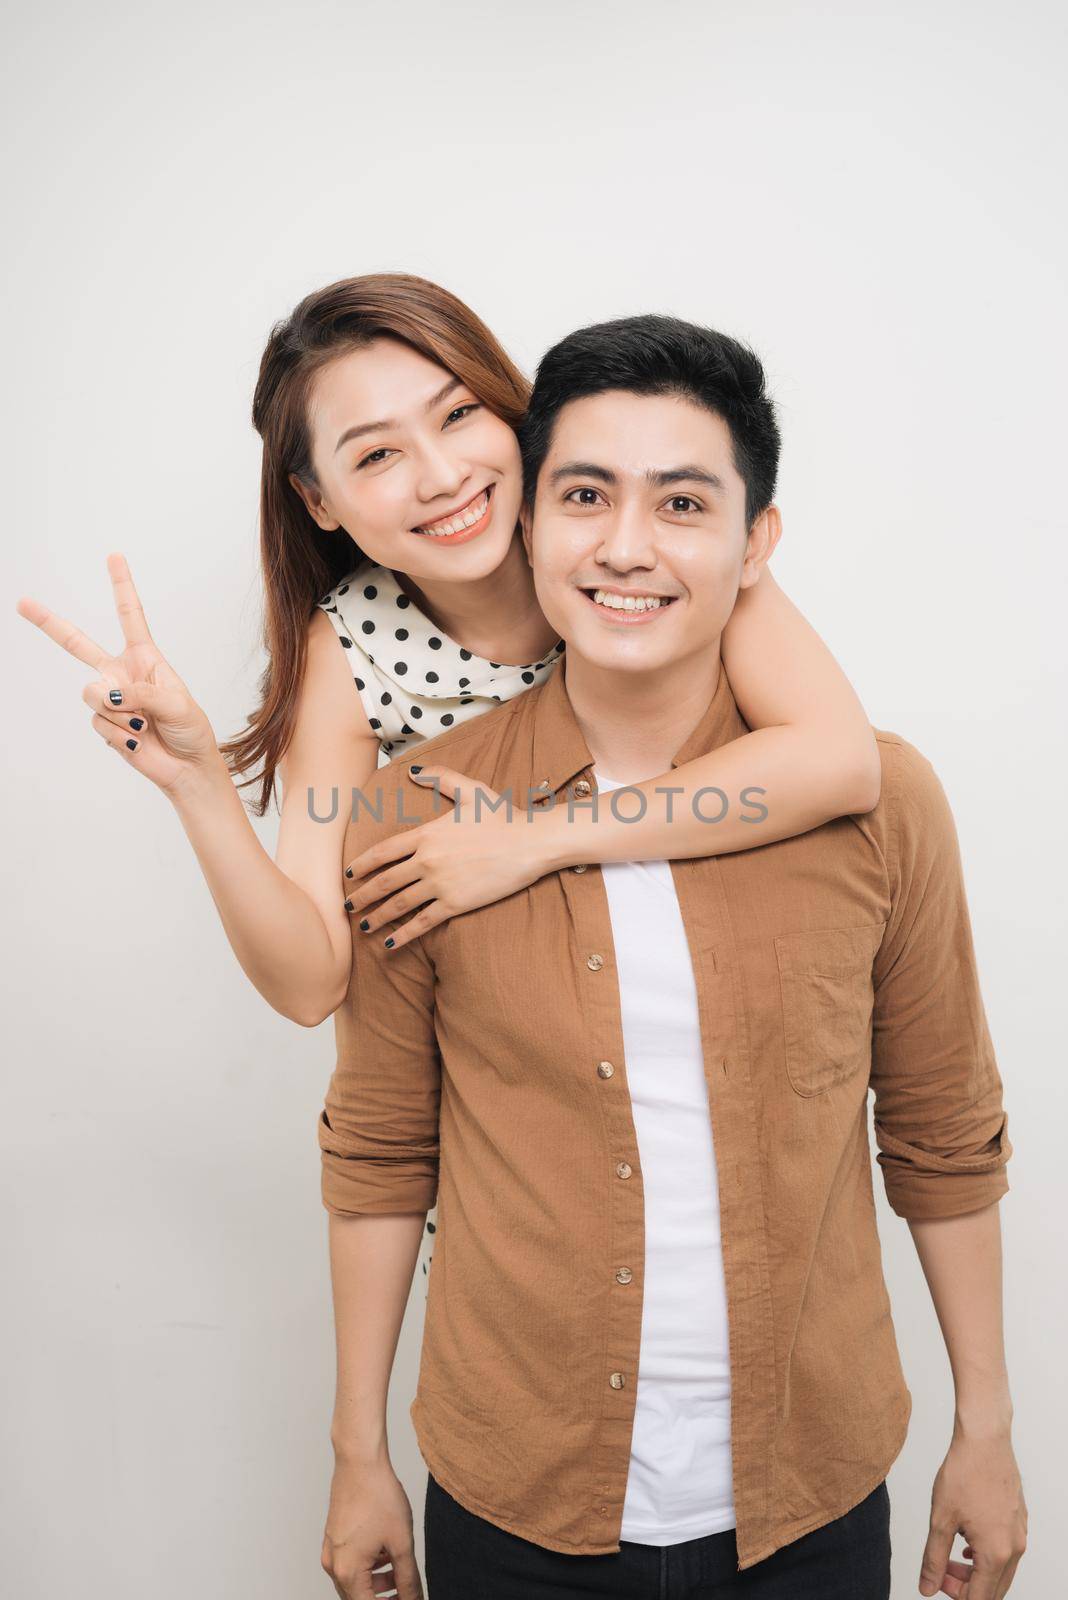 man carrying his lover on back, woman showing peace symbol over white background